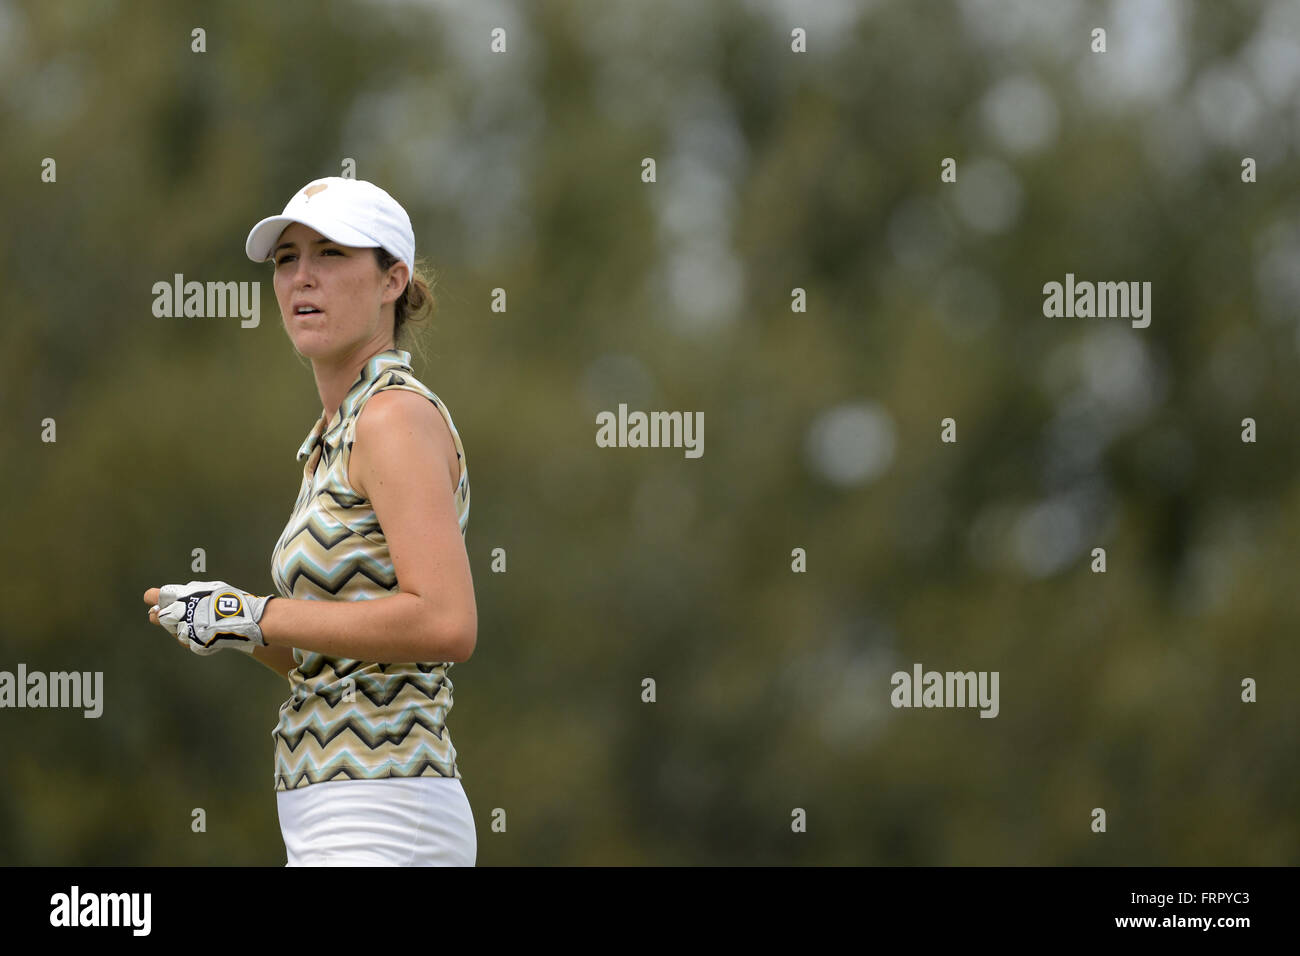 Kissimmee, FL, USA. 22nd Sep, 2013. Jaye Marie Green during the final round of the Symetra Tour's Volvik Championship on the Plamer Course at Reunion Resort on Sept. 22, 2013 in Kissimmee, Florida. ZUMA Press/Scott A. Miller © Scott A. Miller/ZUMA Wire/Alamy Live News Stock Photo